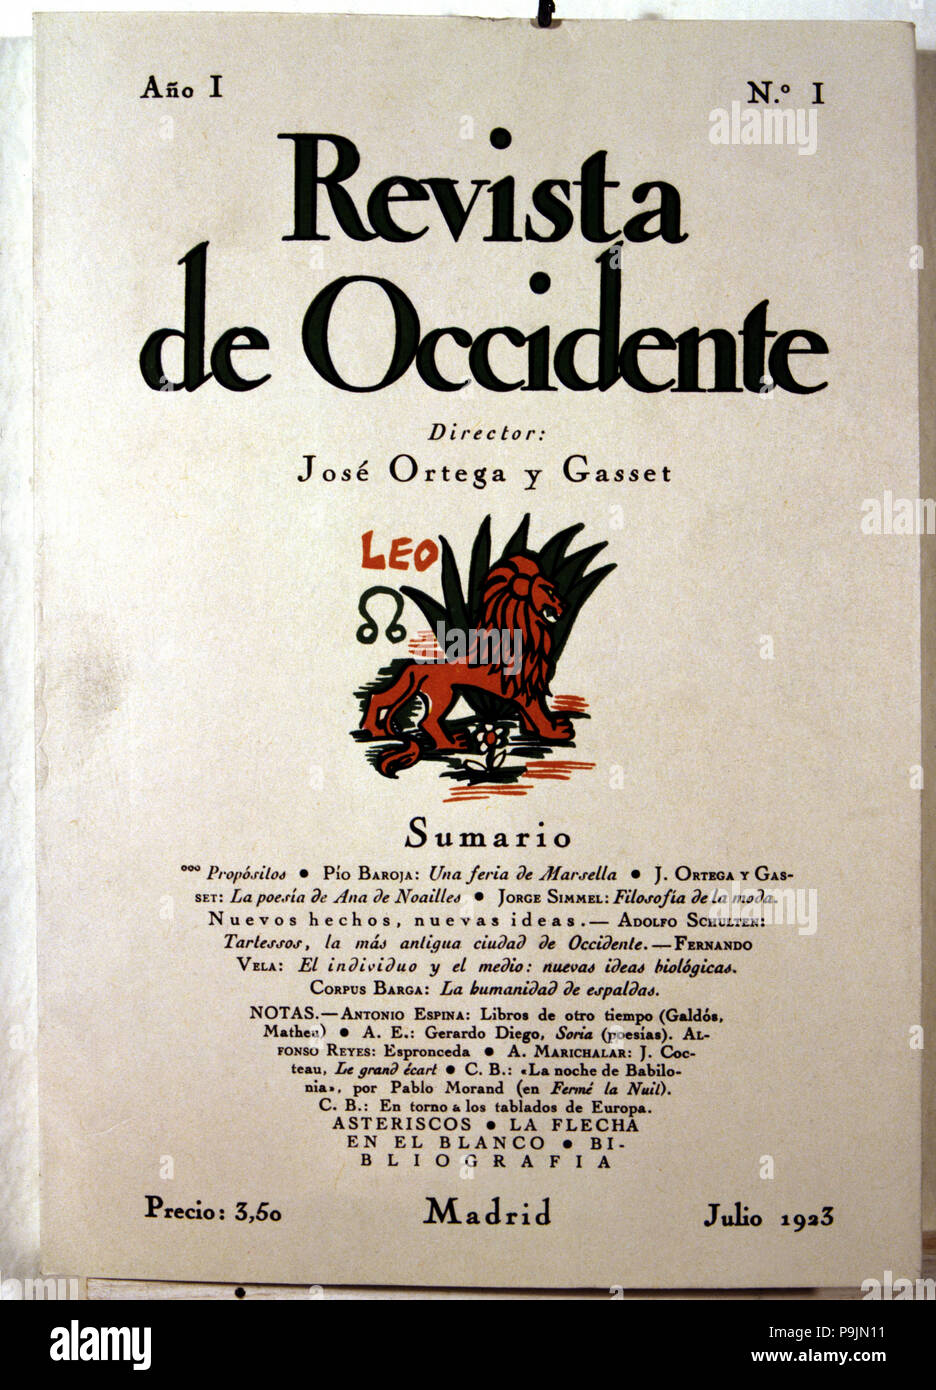 Cover of 'Revista de Occidente'  No. 1. July 1932 magazine founded and directed by José Ortega y … Stock Photo